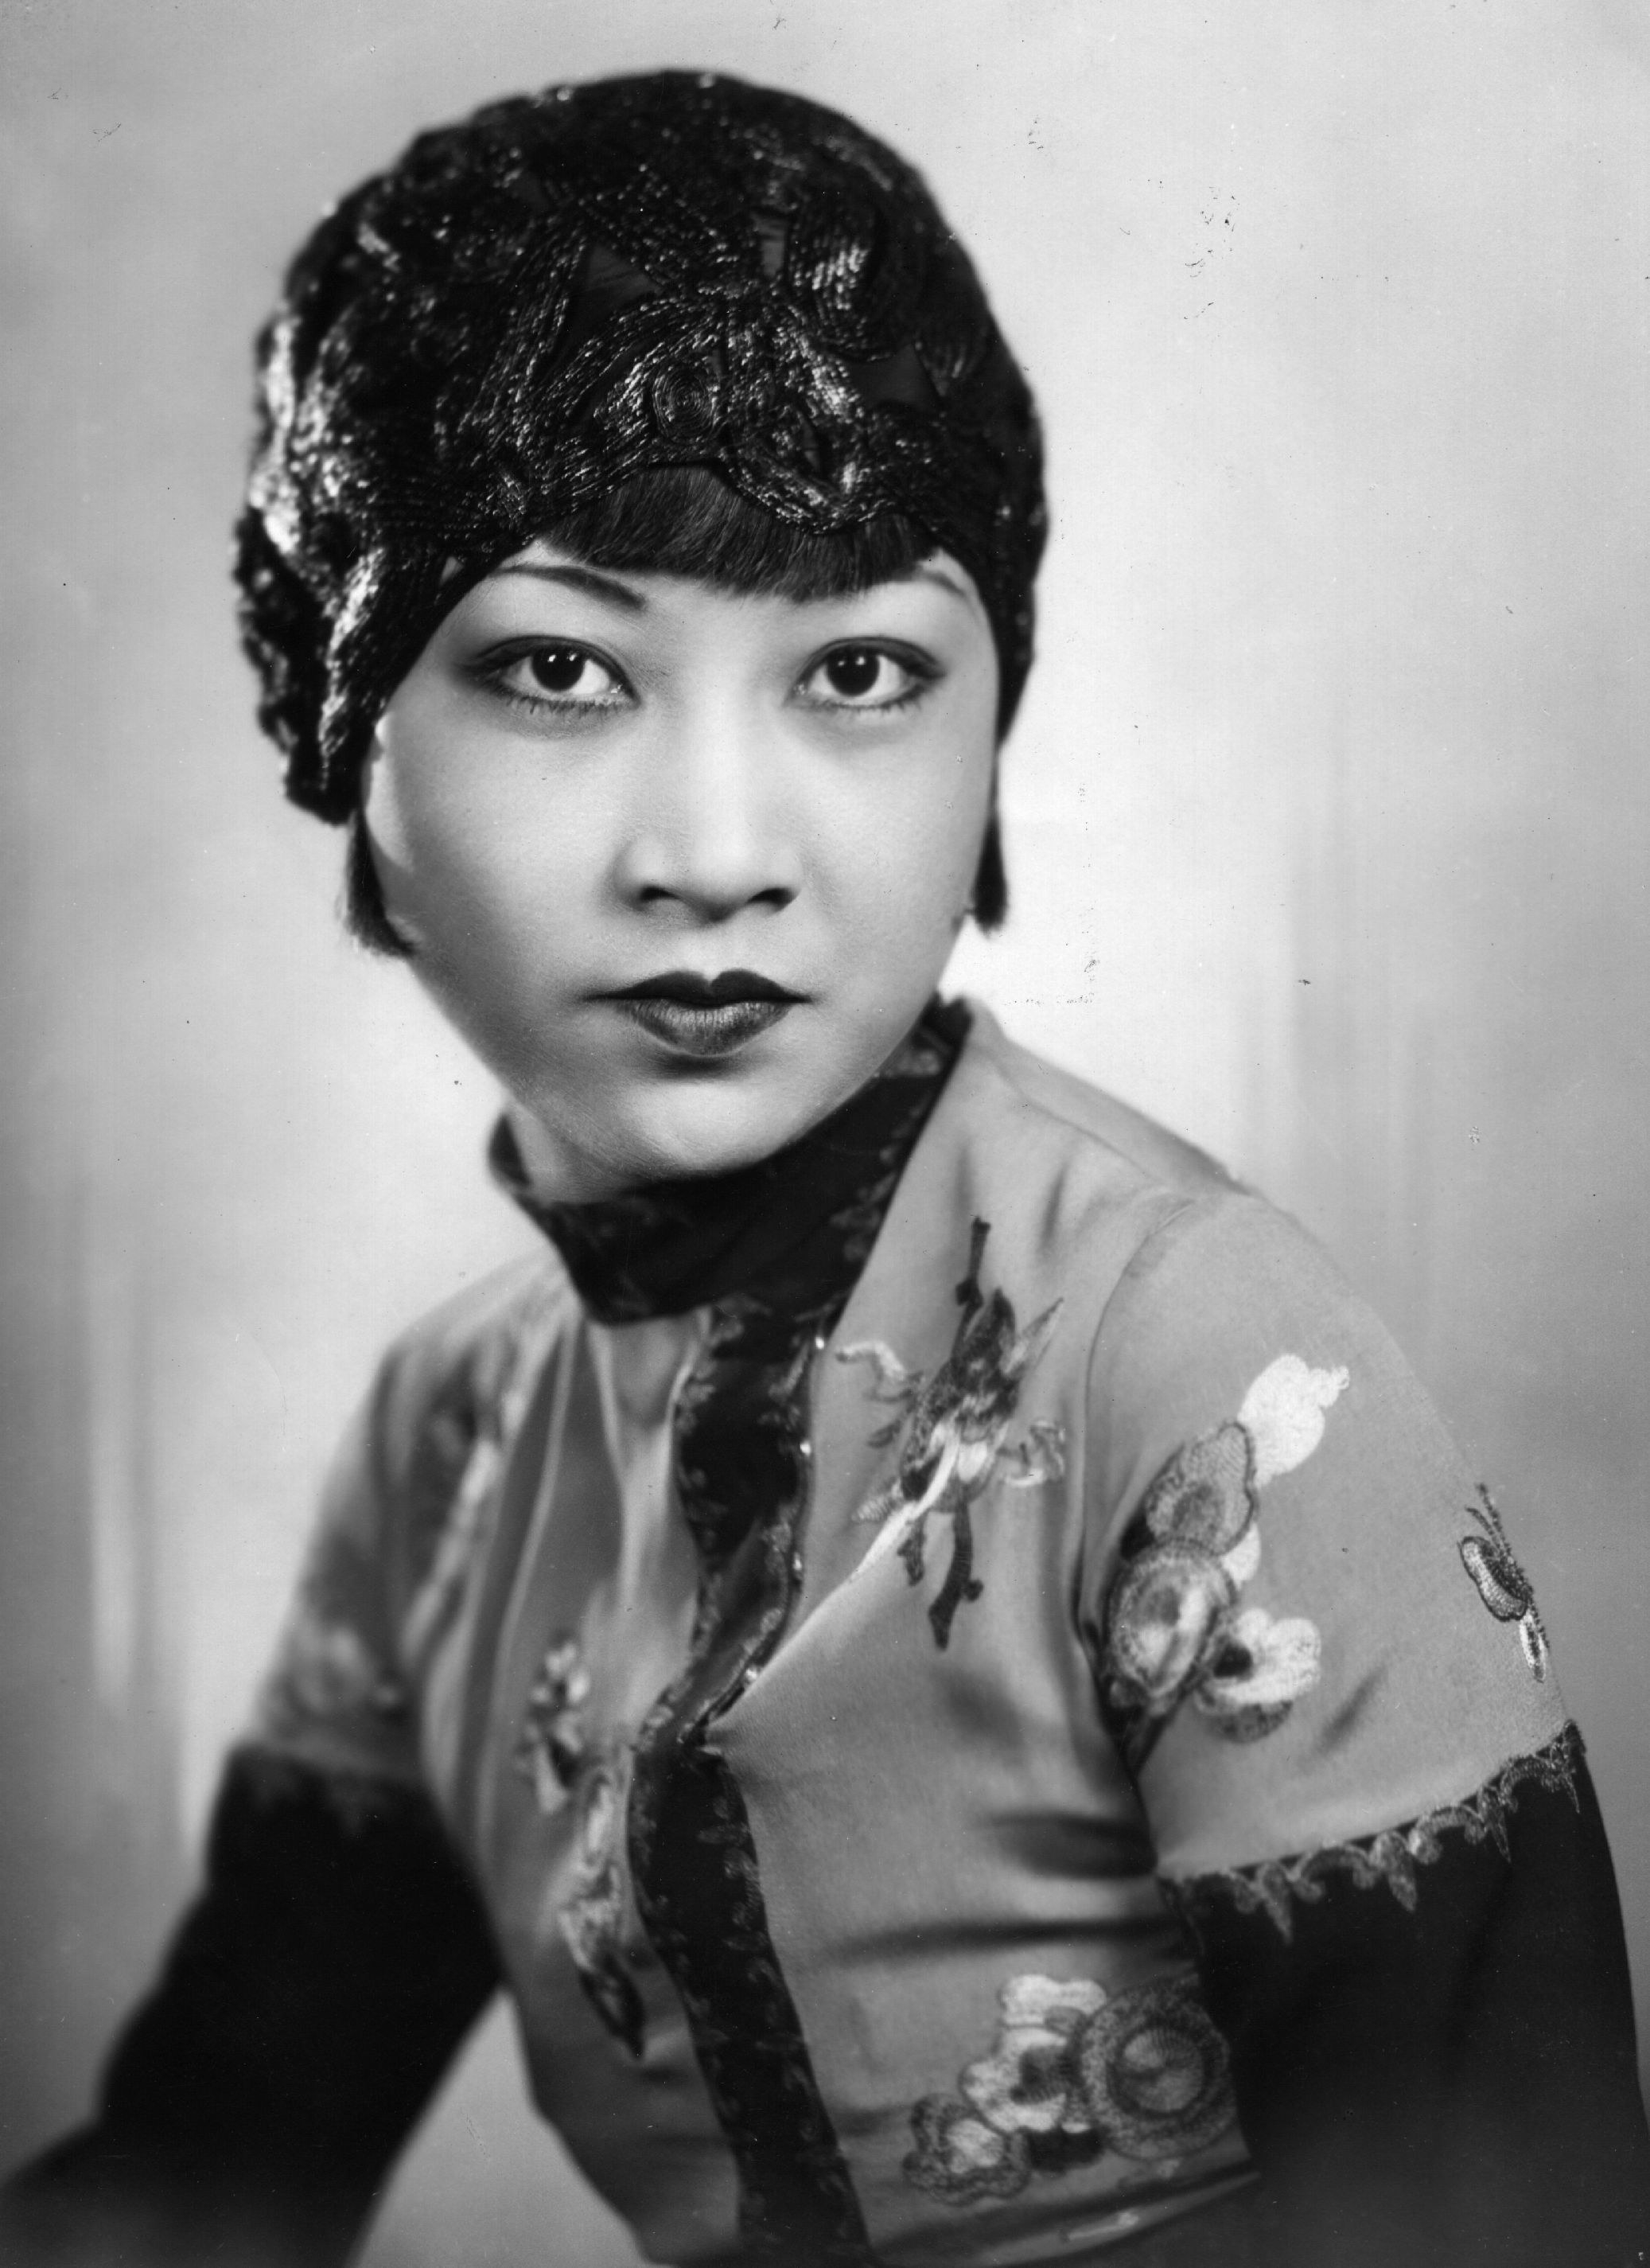 Wong posing for a portrait in 1929